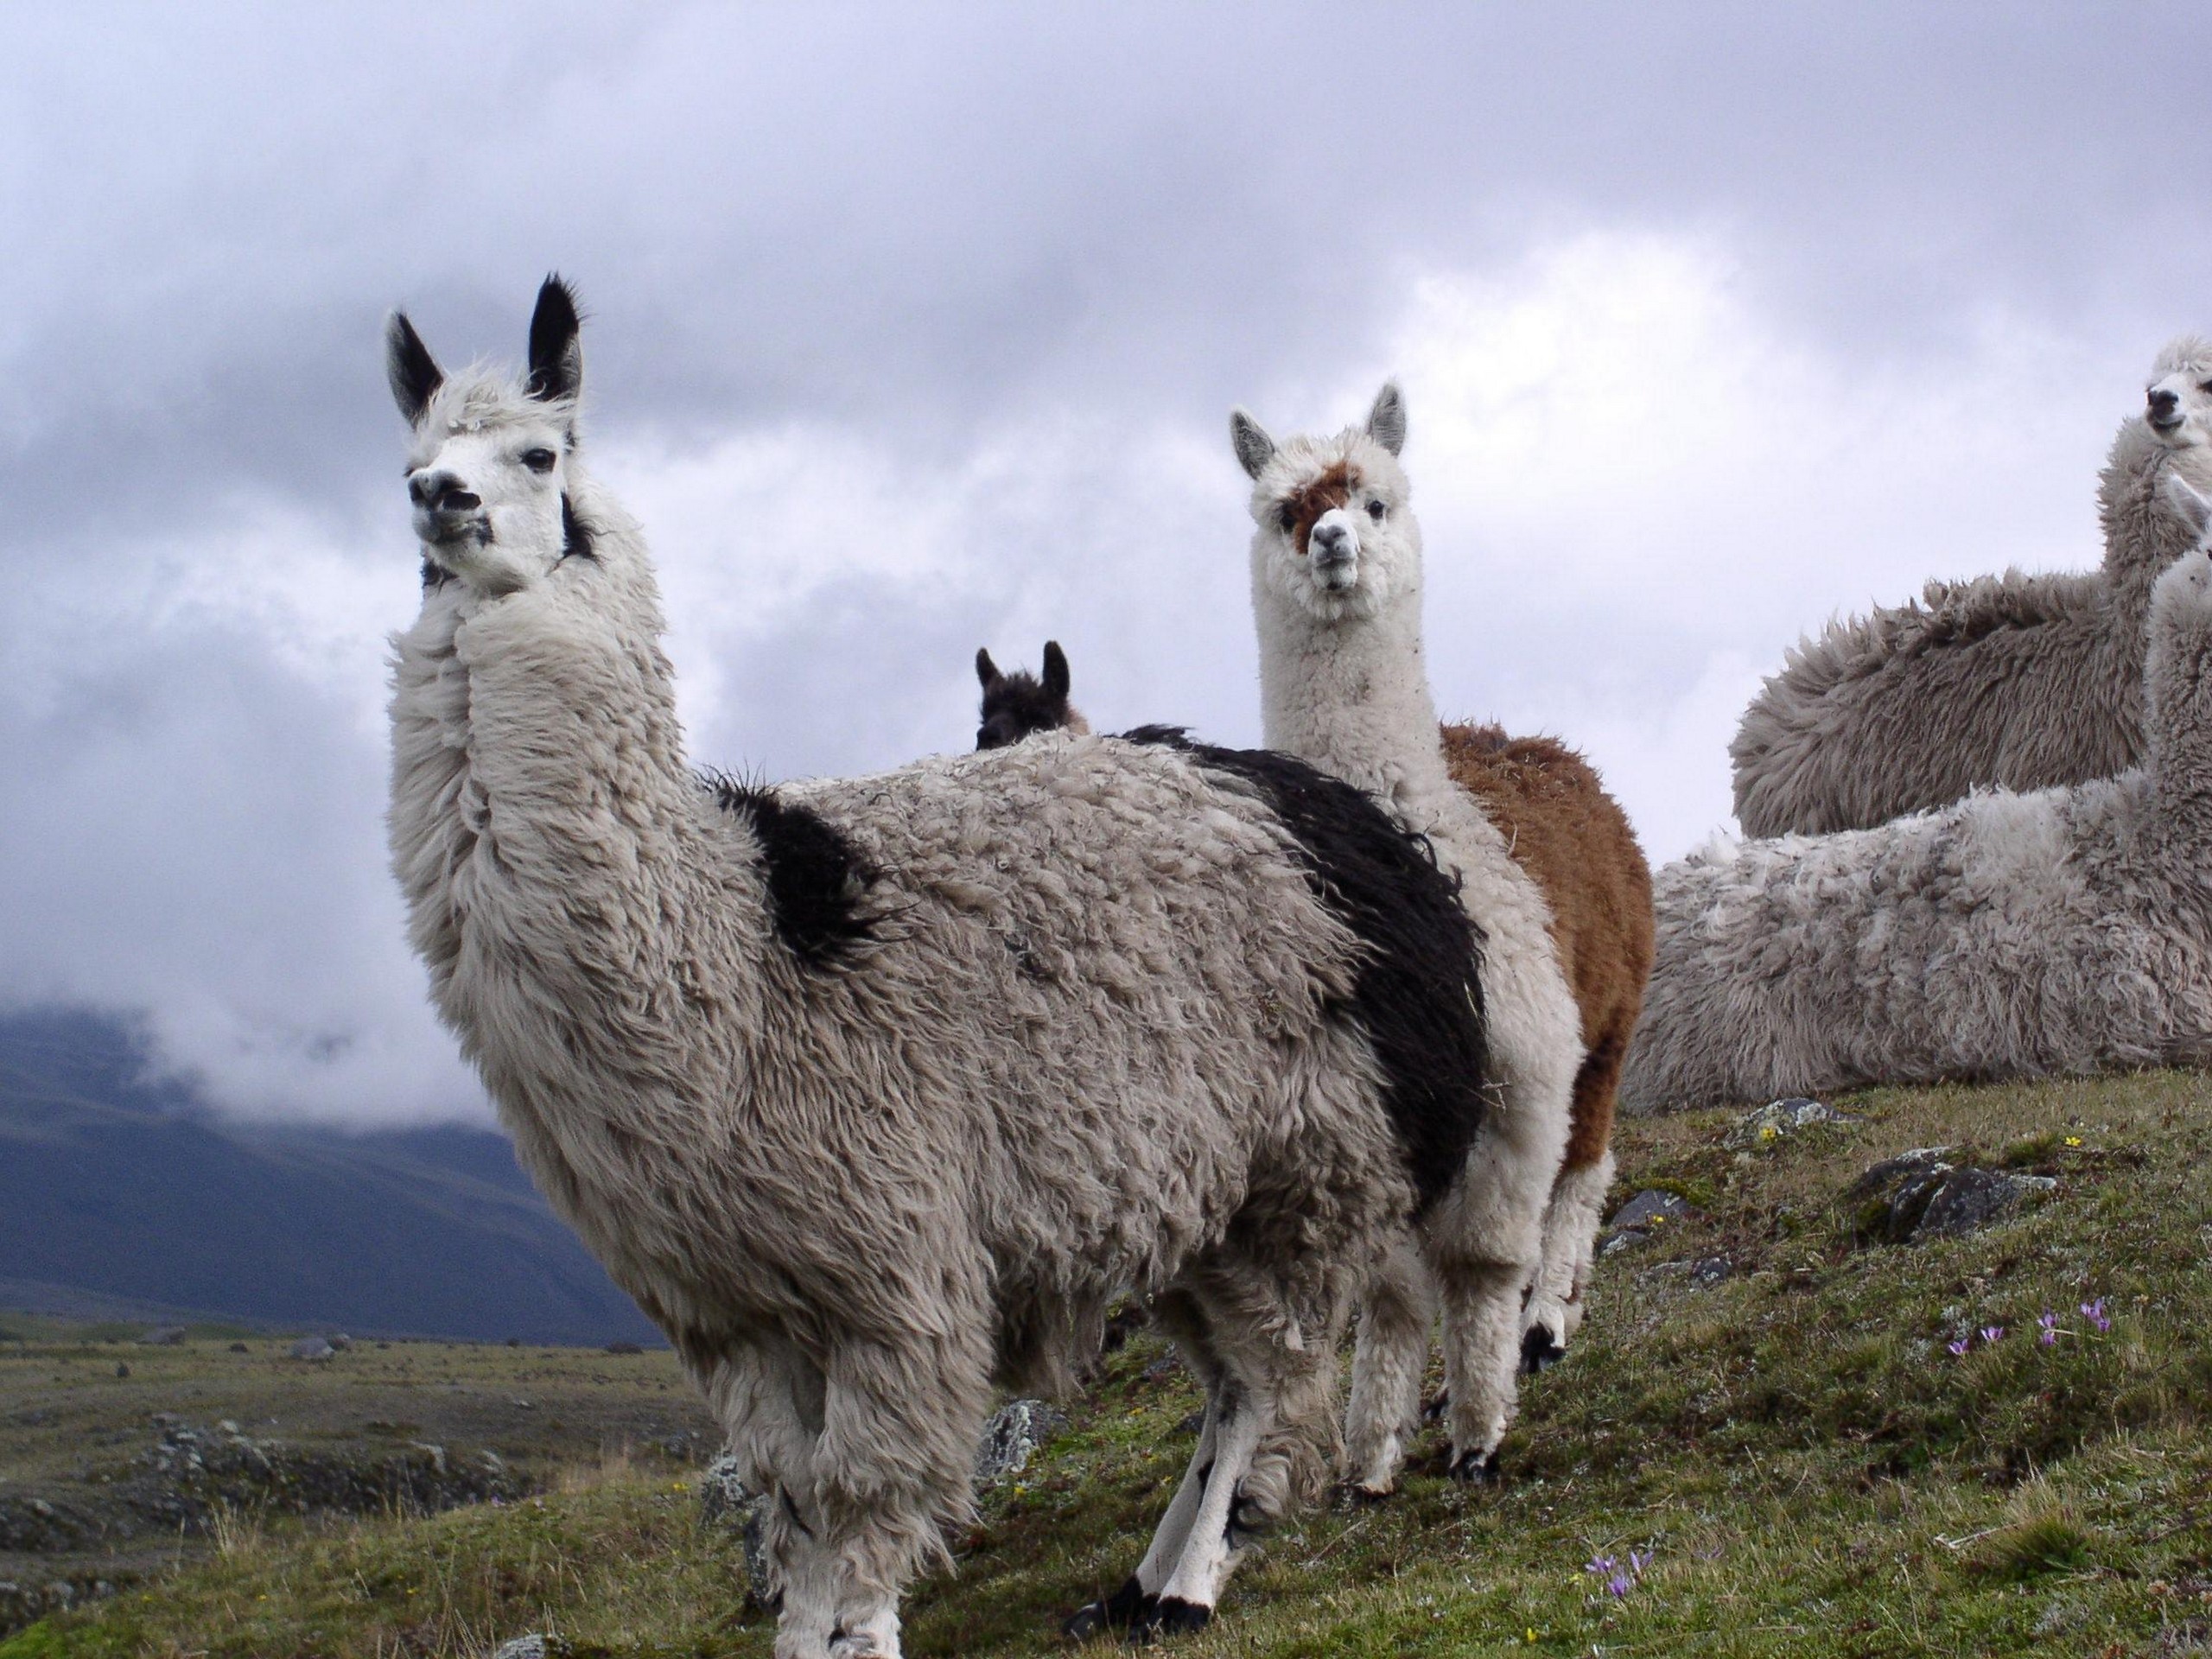 Three fluffy llamas met on the hike to one of the peaks in Ecuador